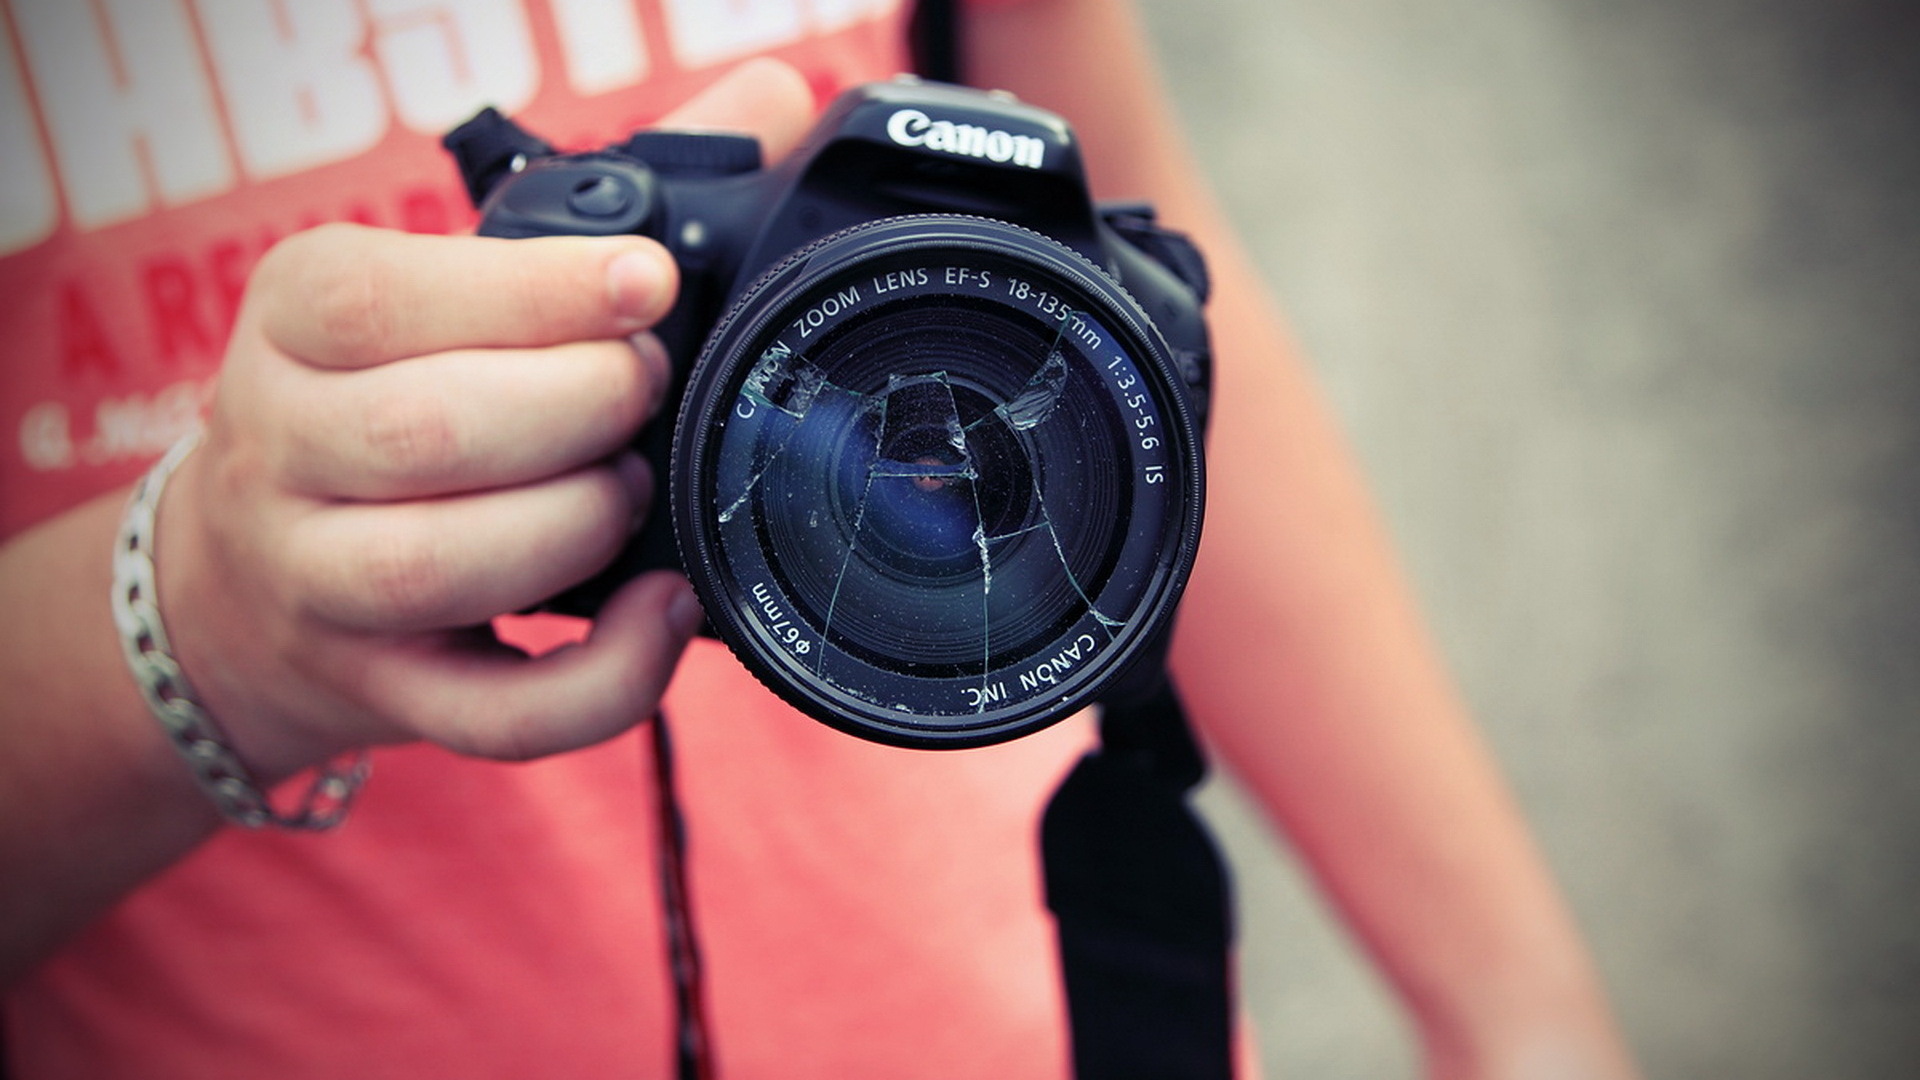 Download The Wallpaper Of Canon Camera , HD Wallpaper & Backgrounds